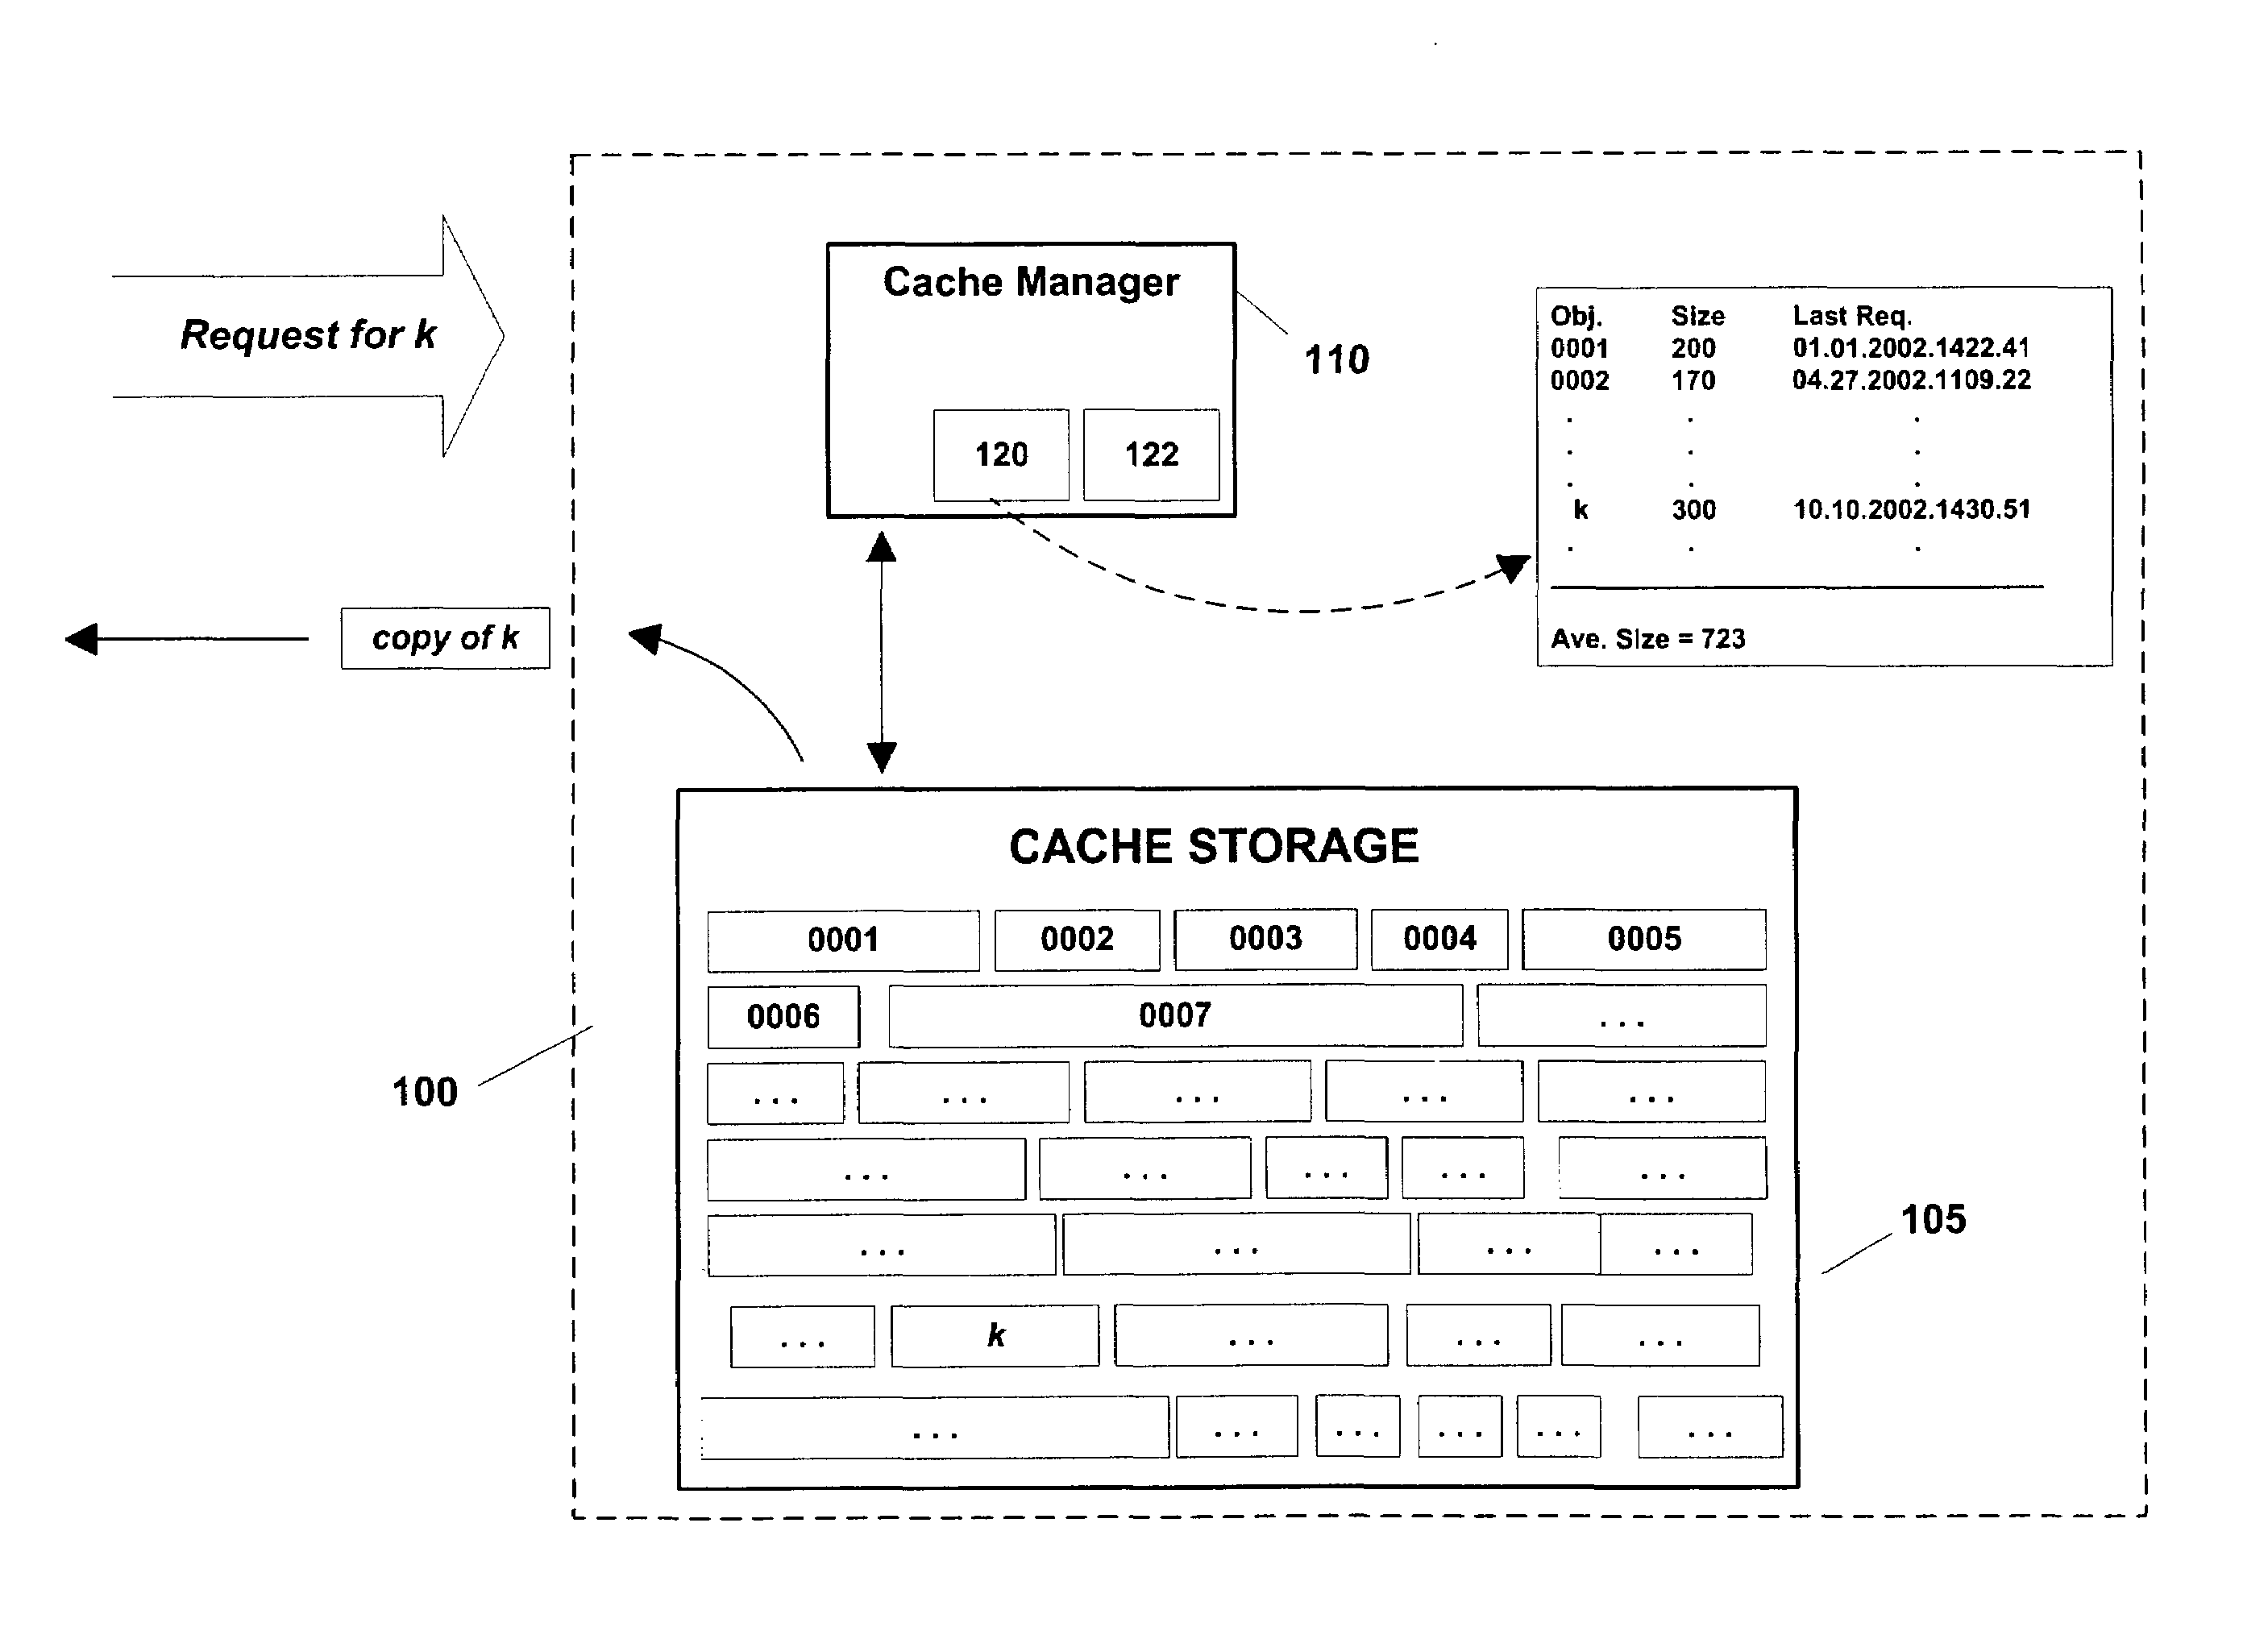 Memory admission control based on object size or request frequency